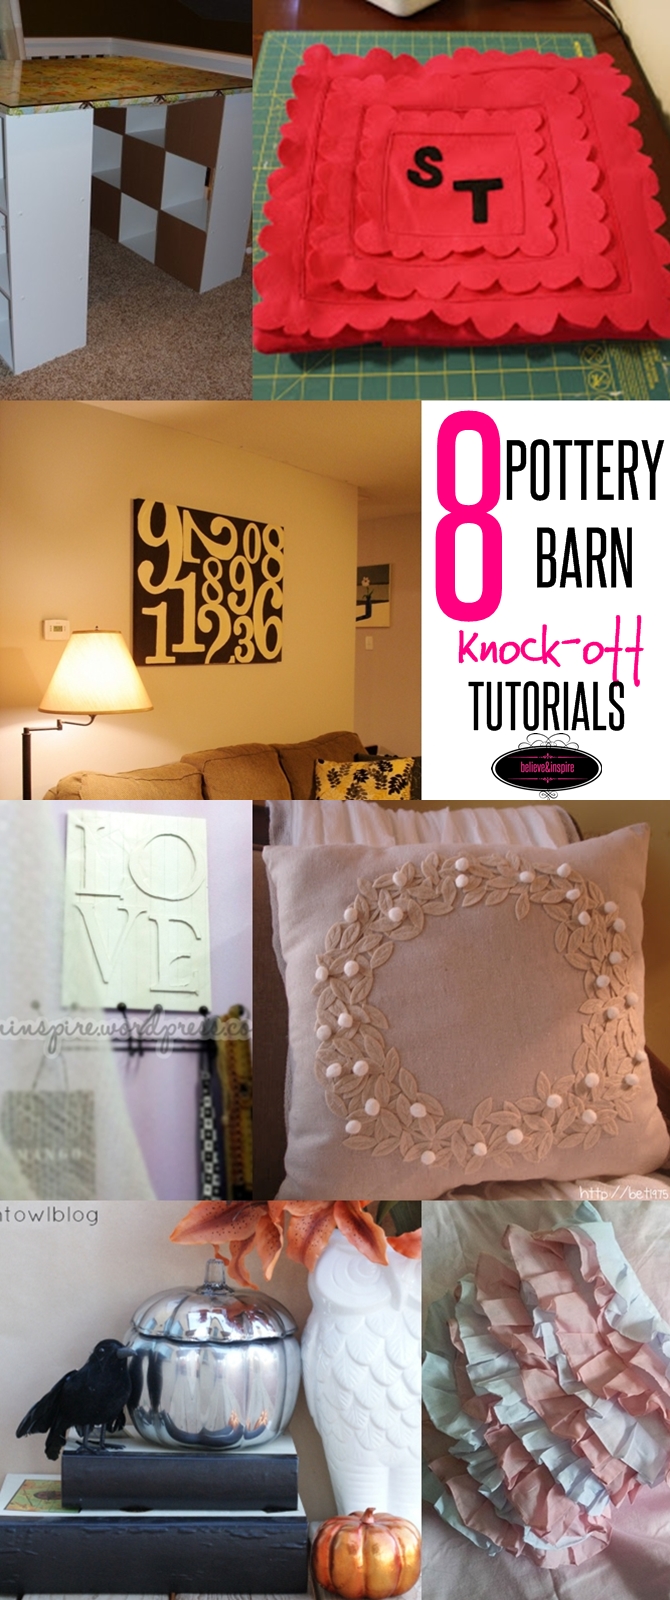 Top 7 pottery barn knock-offs